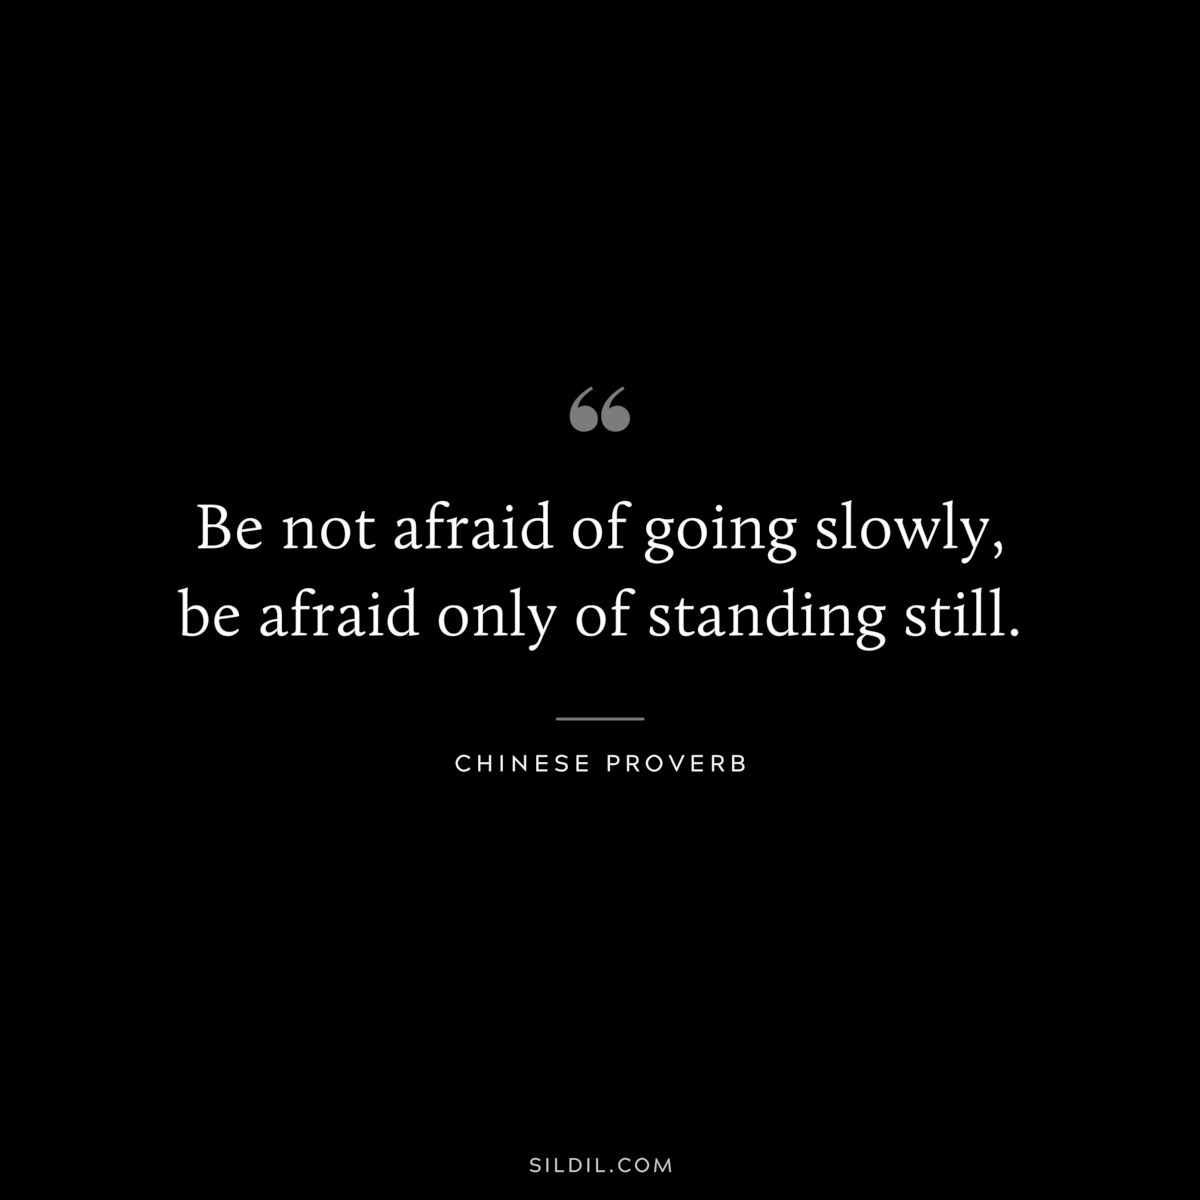 Be not afraid of going slowly, be afraid only of standing still. ― Chinese Proverb